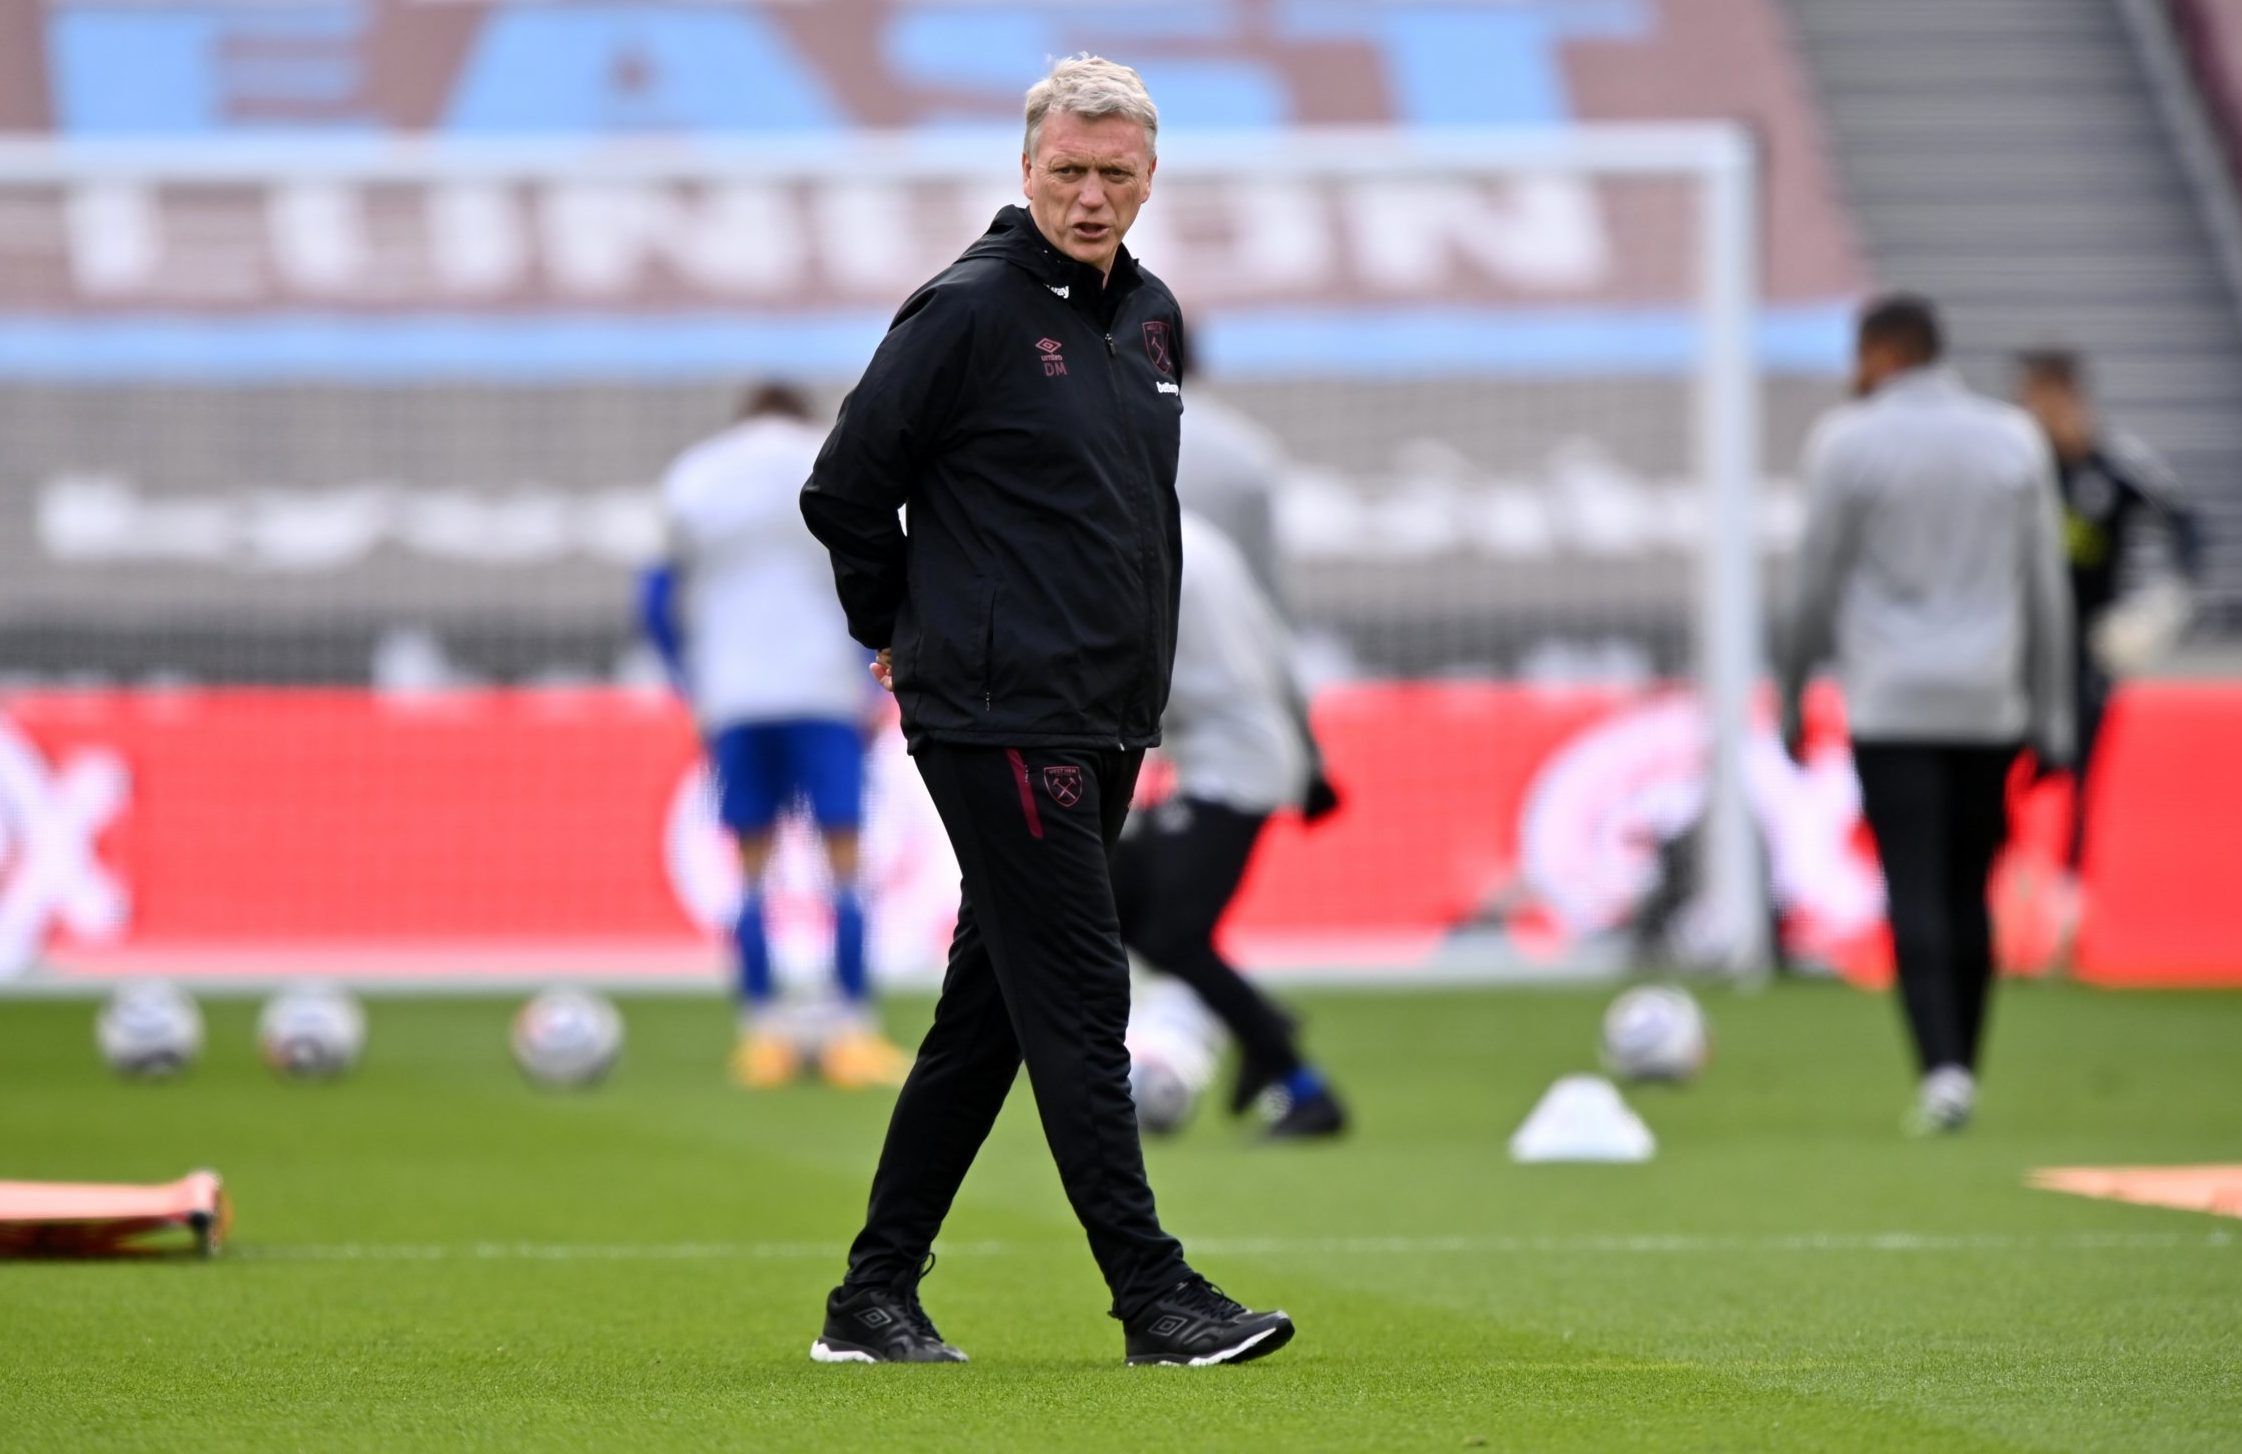 west ham manager david moyes walks across the pitch during warm up prior to premier league clash with leicester city at the london stadium